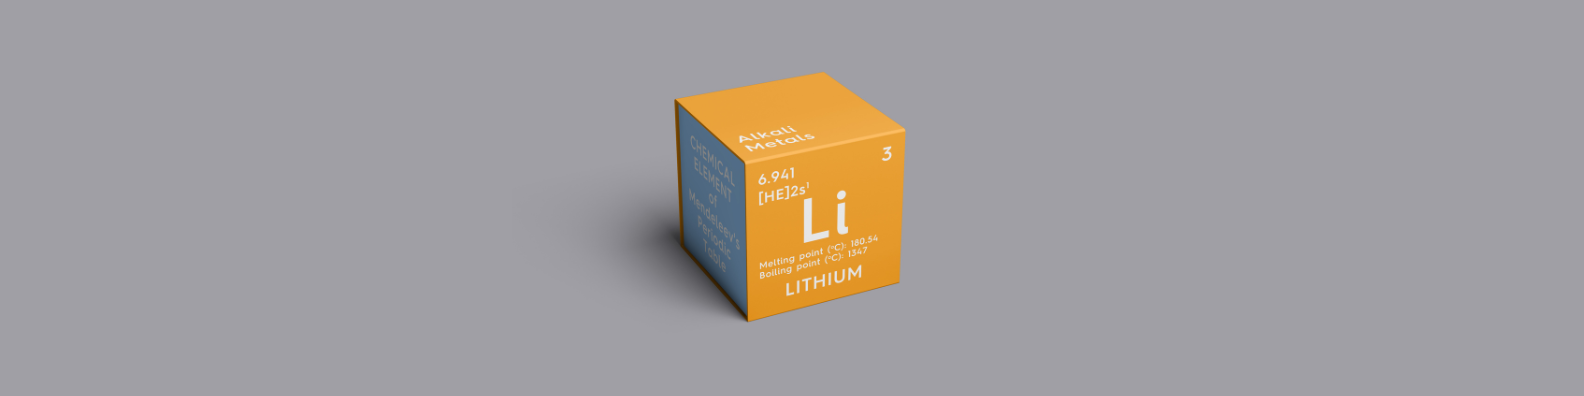 What is the difference between Lithium-Ion and LiFePO4?